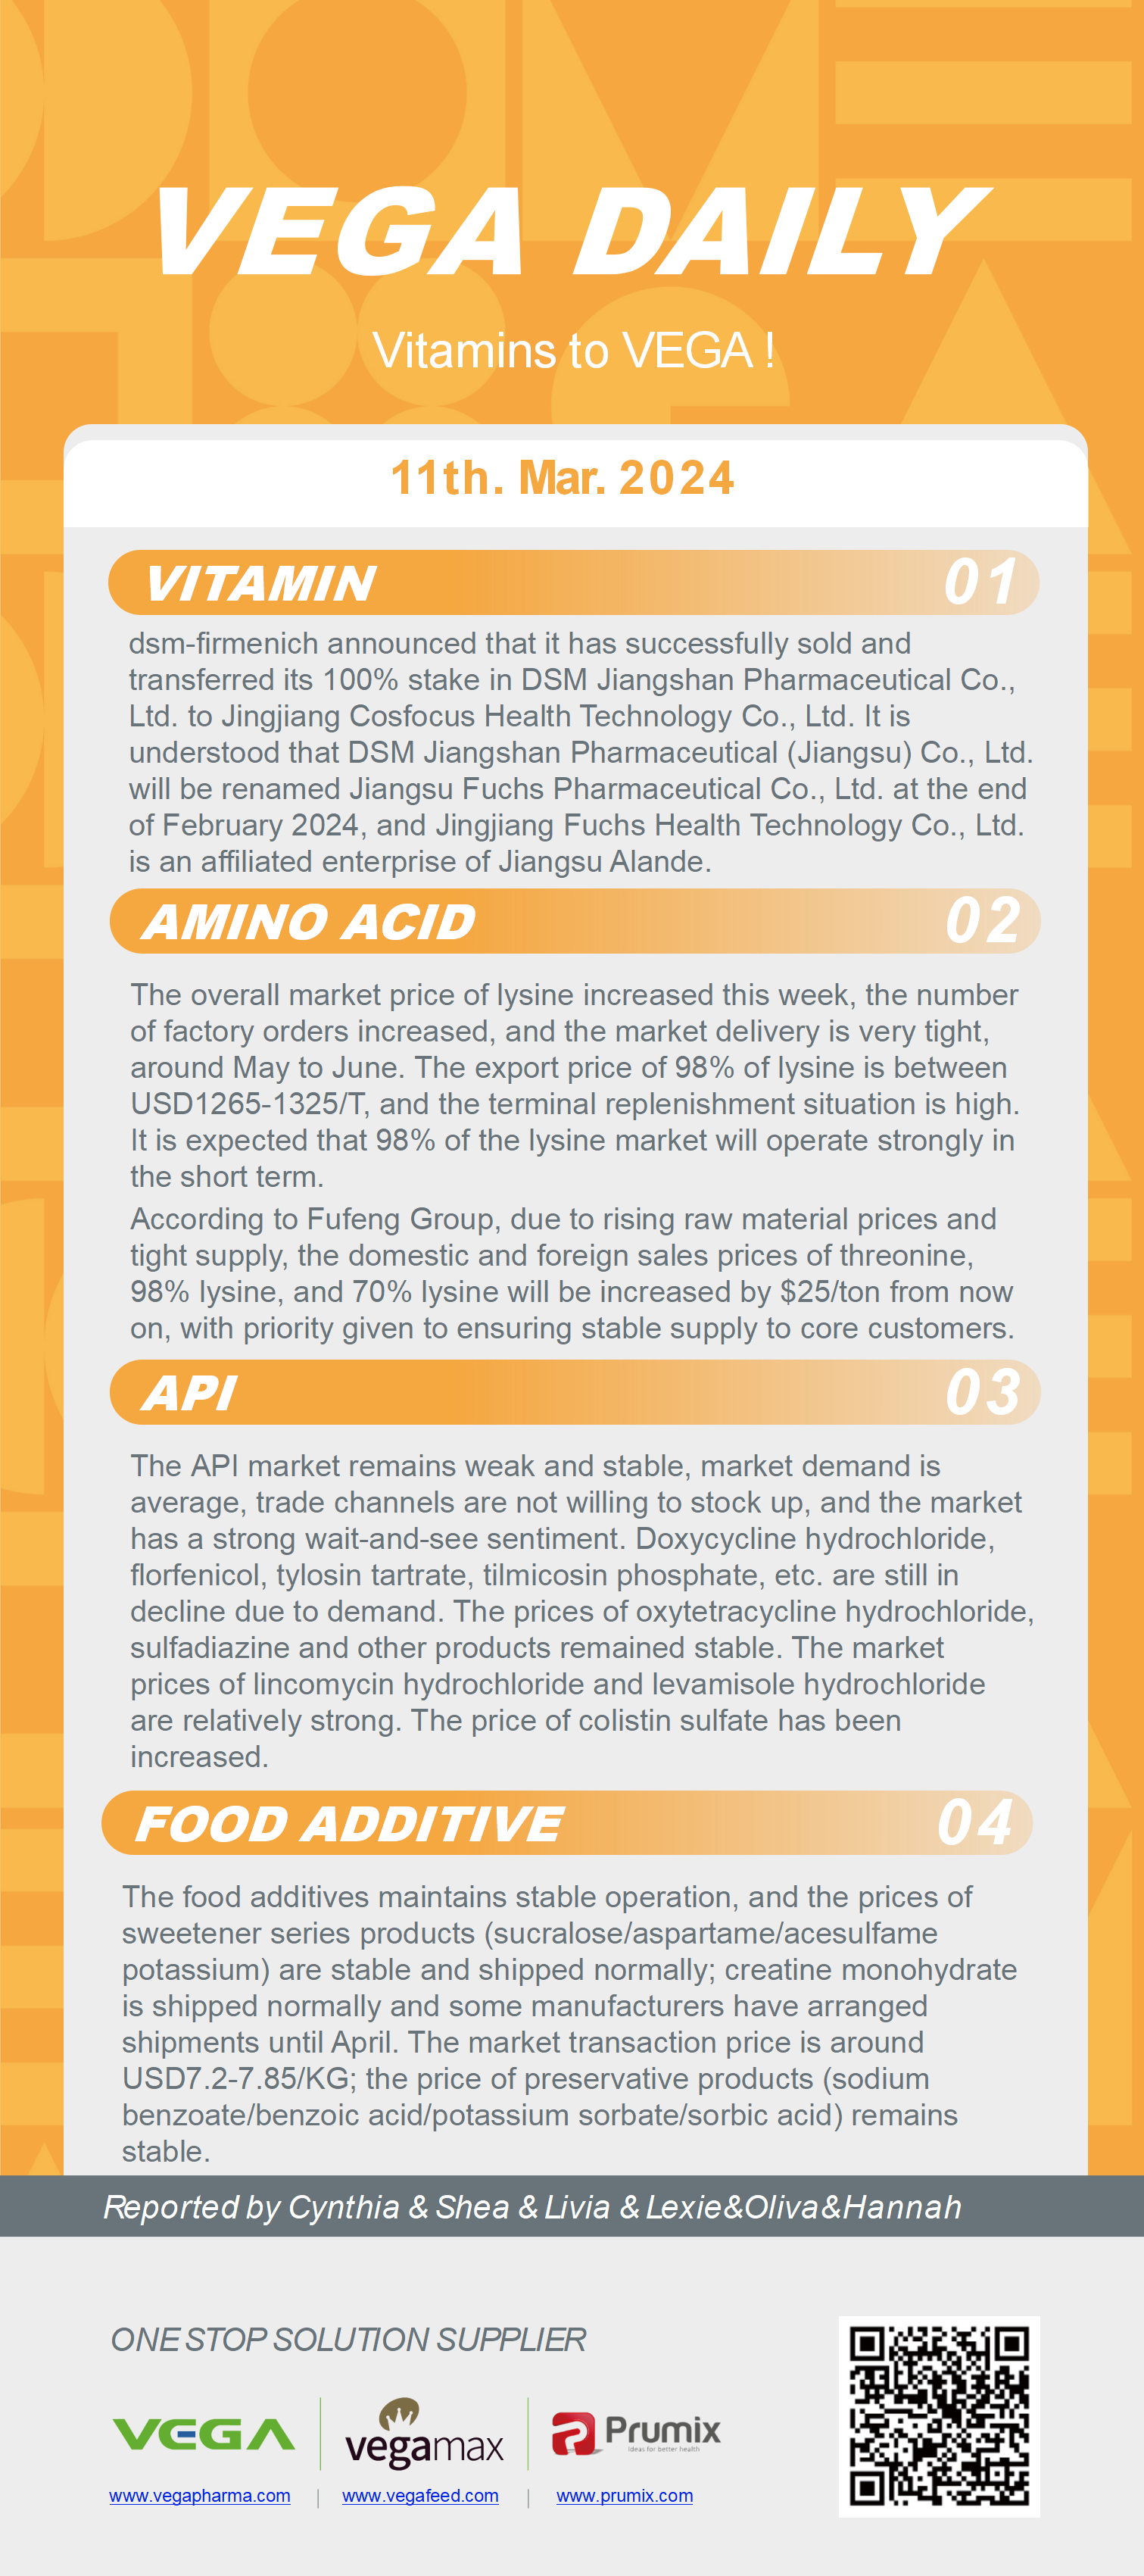 Vega Daily Dated on Mar 11th 2024 Vitamin Amino Acid APl Food Additives.png